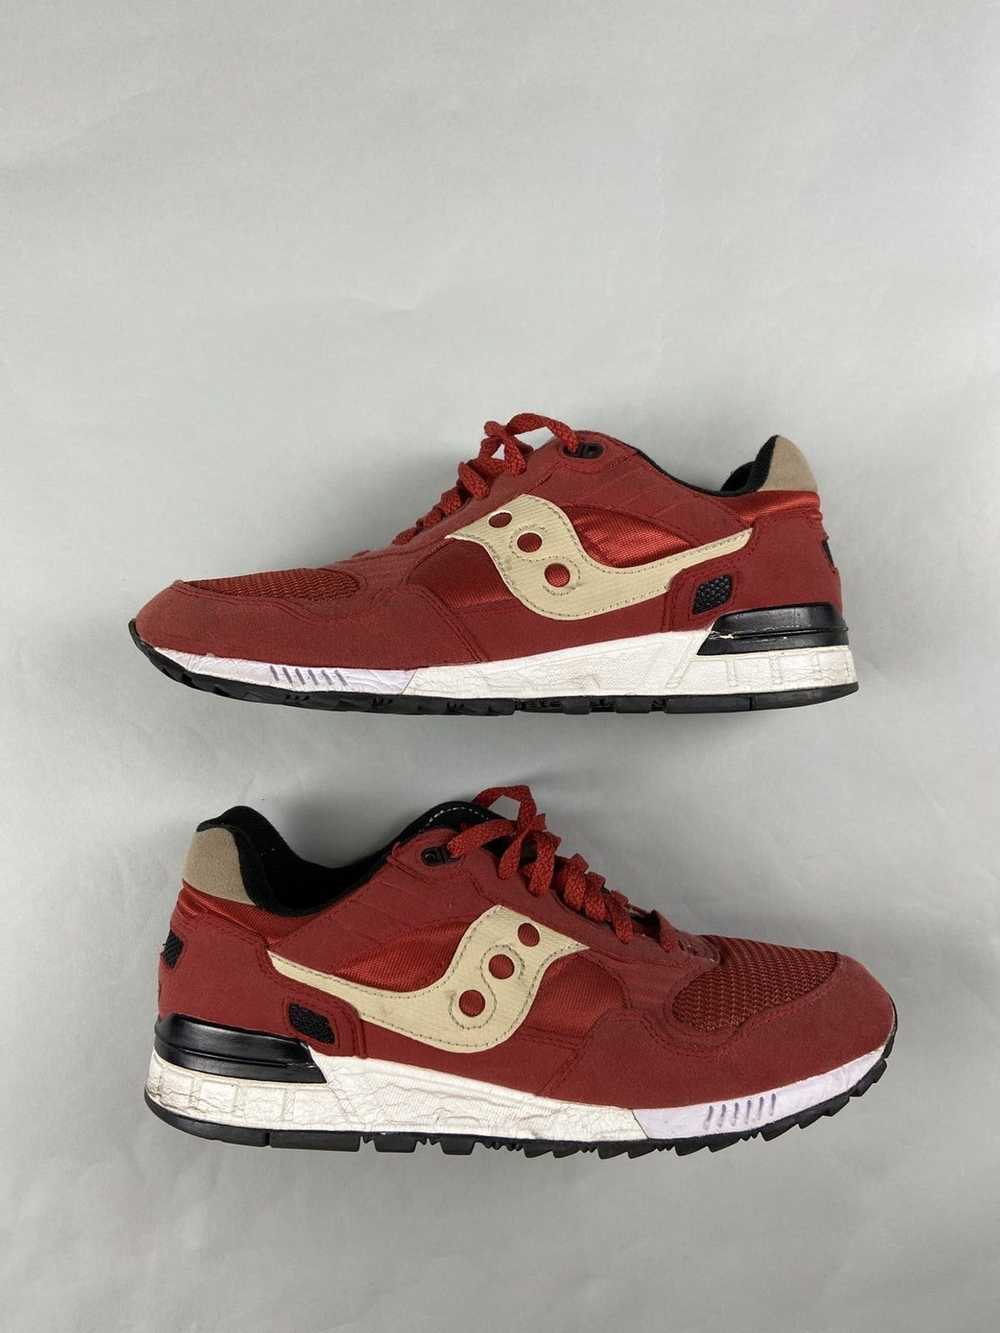 Saucony Saucony Shadow 5000 Vintage Running Shoes - image 2